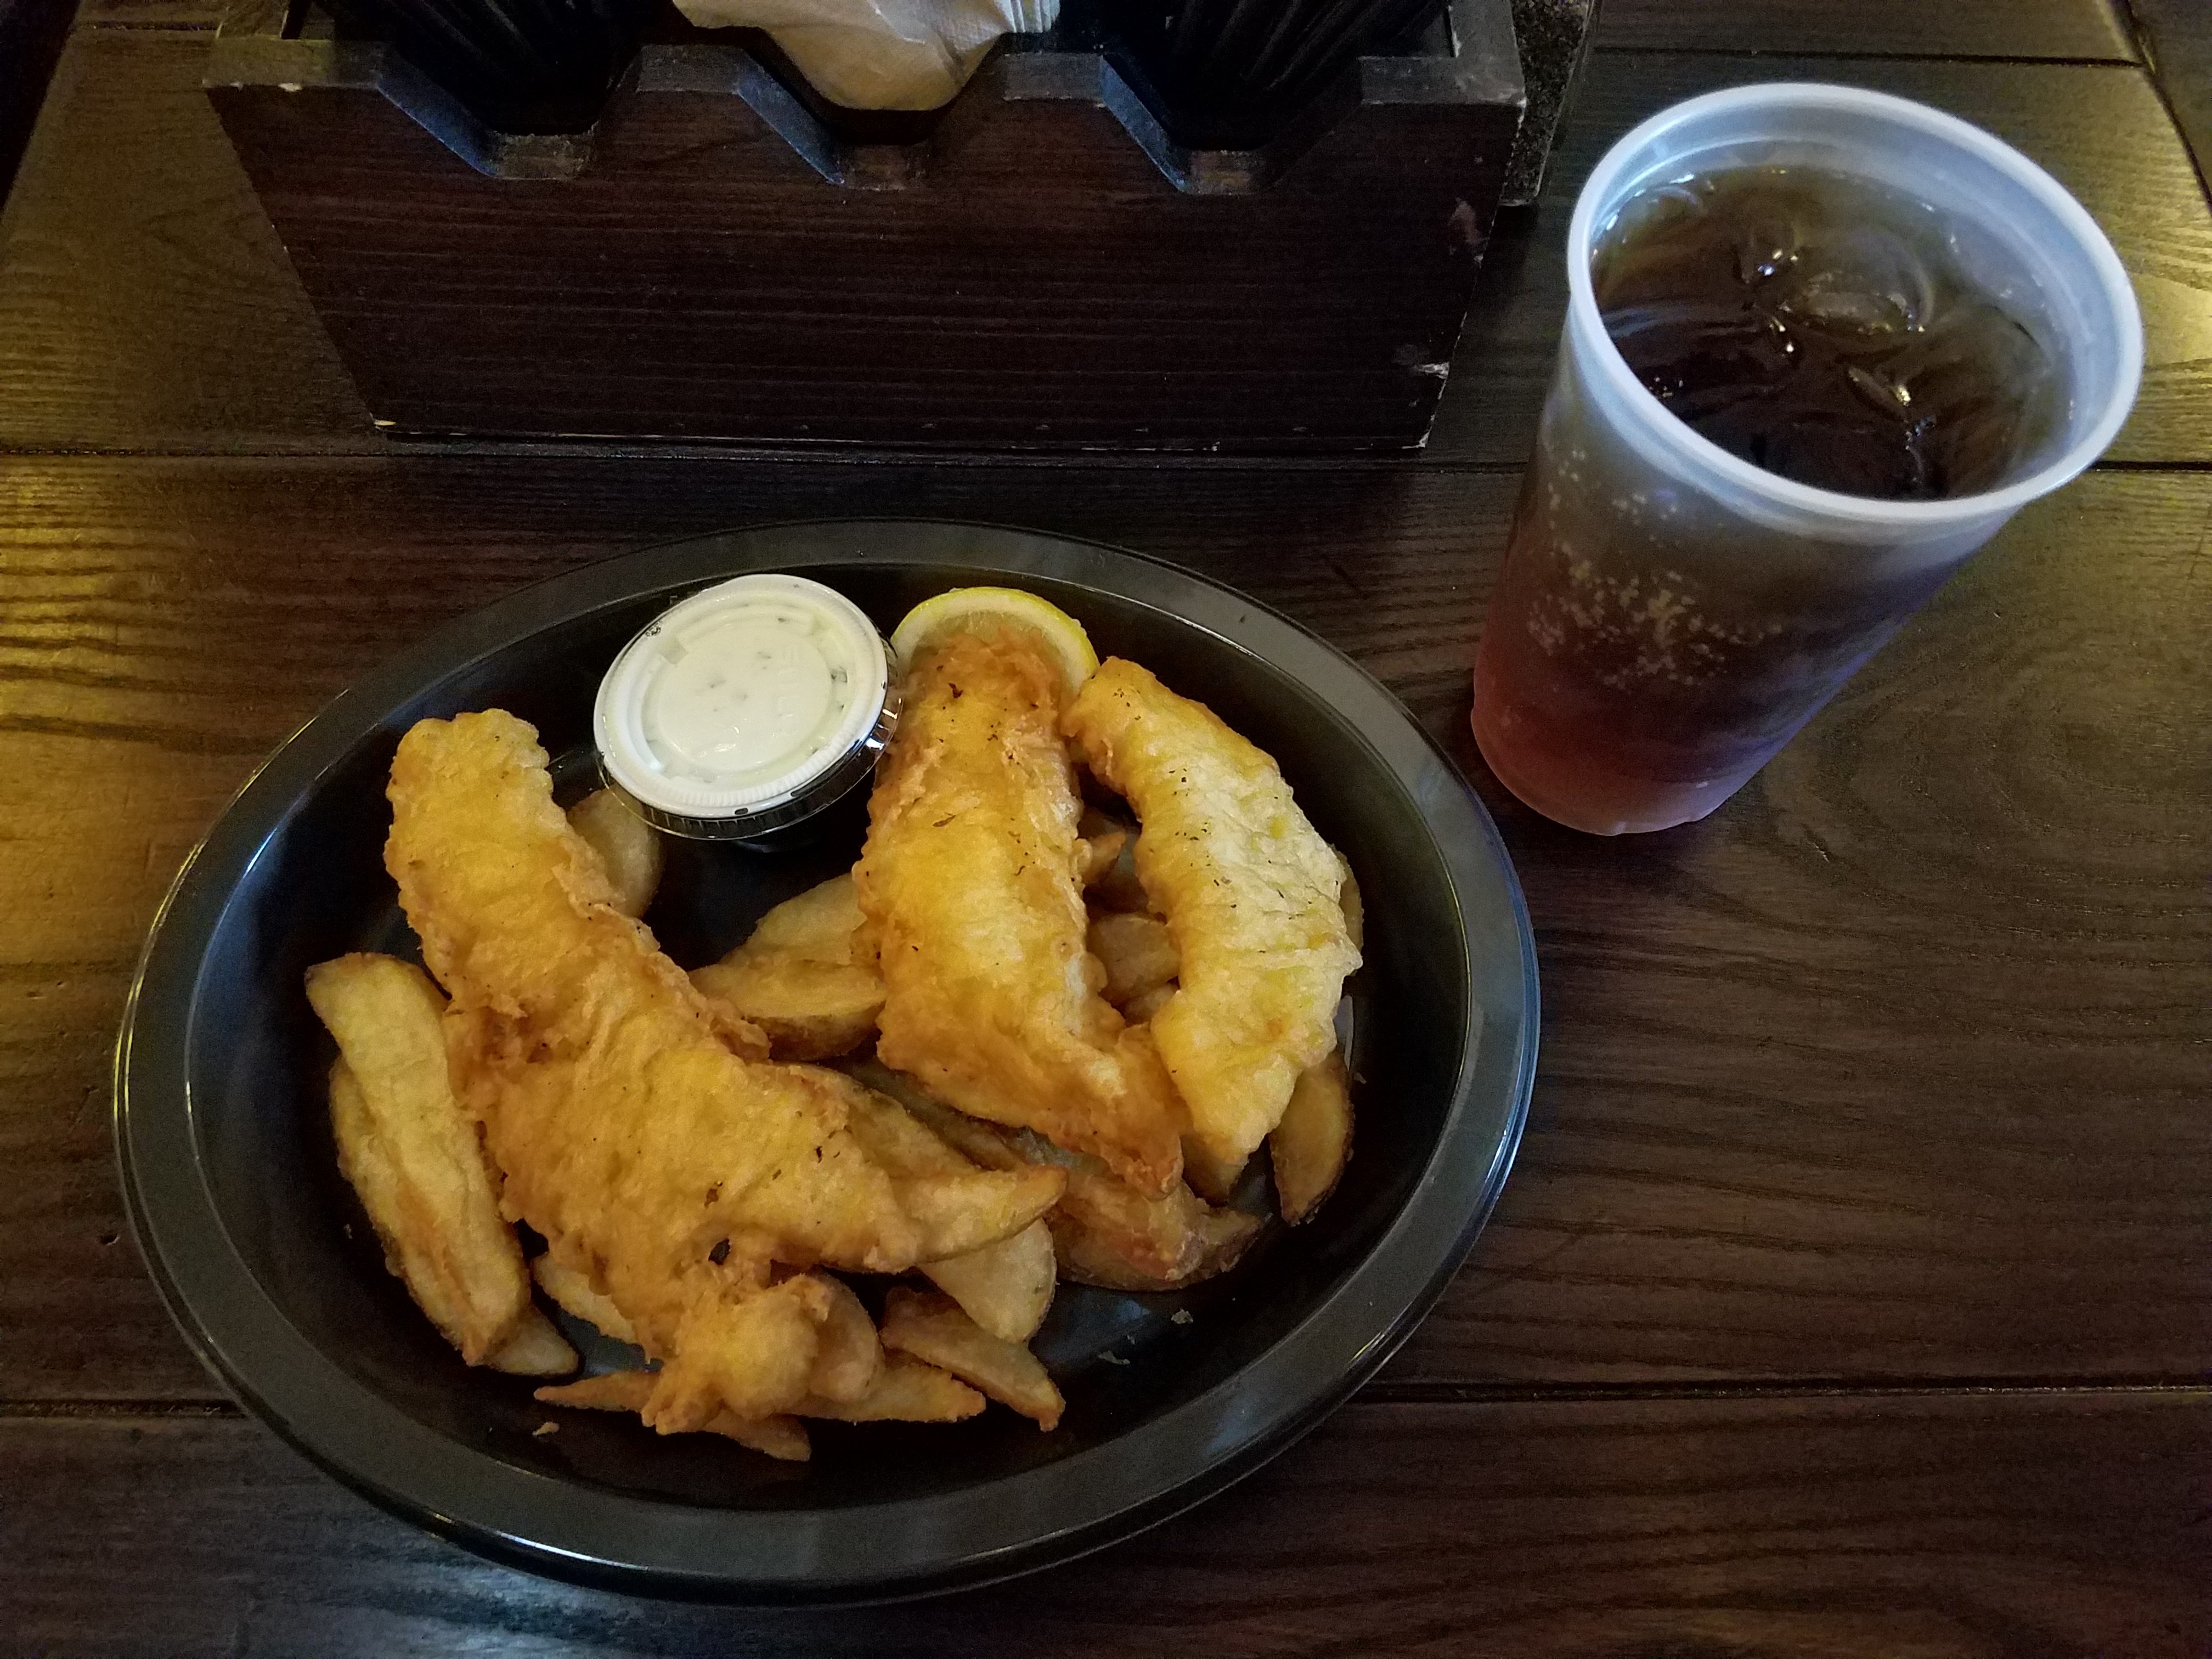 Fish and chips at Leaky Cauldron - Diagon Alley - Universal Studios Orlando - by unofficialuniversal.com